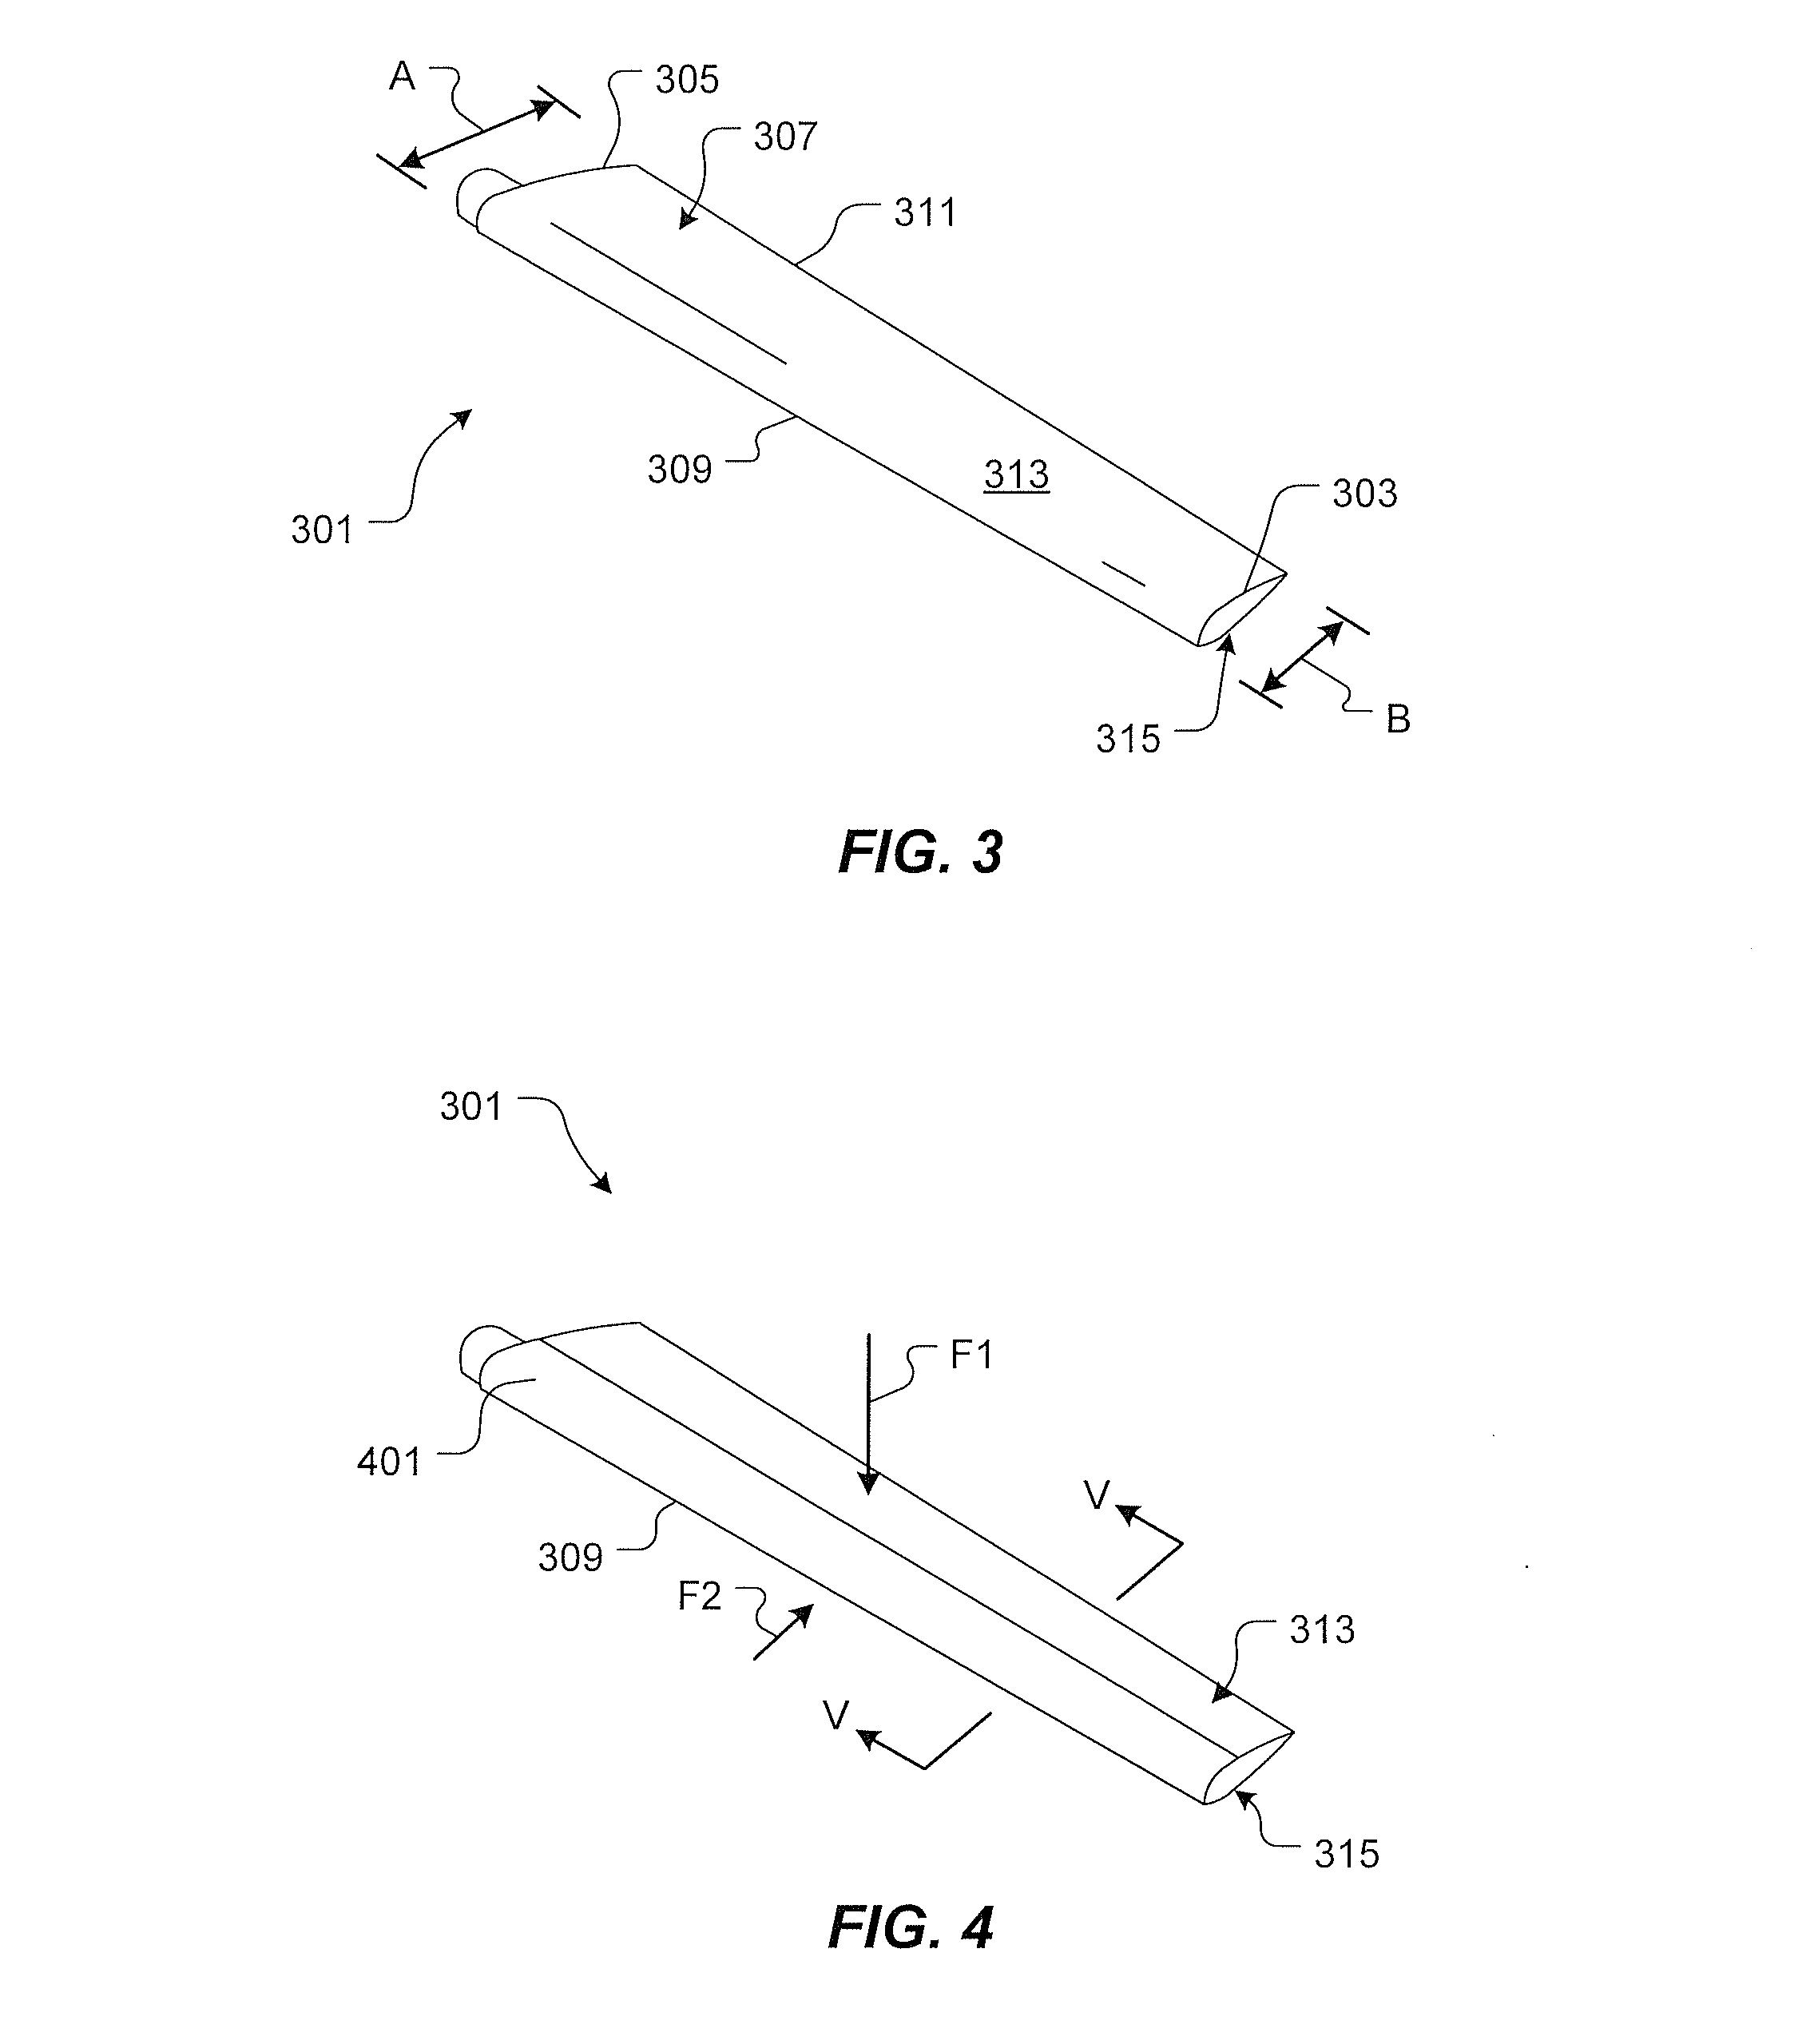 Method of Applying Abrasion Resistant Materials to Rotors